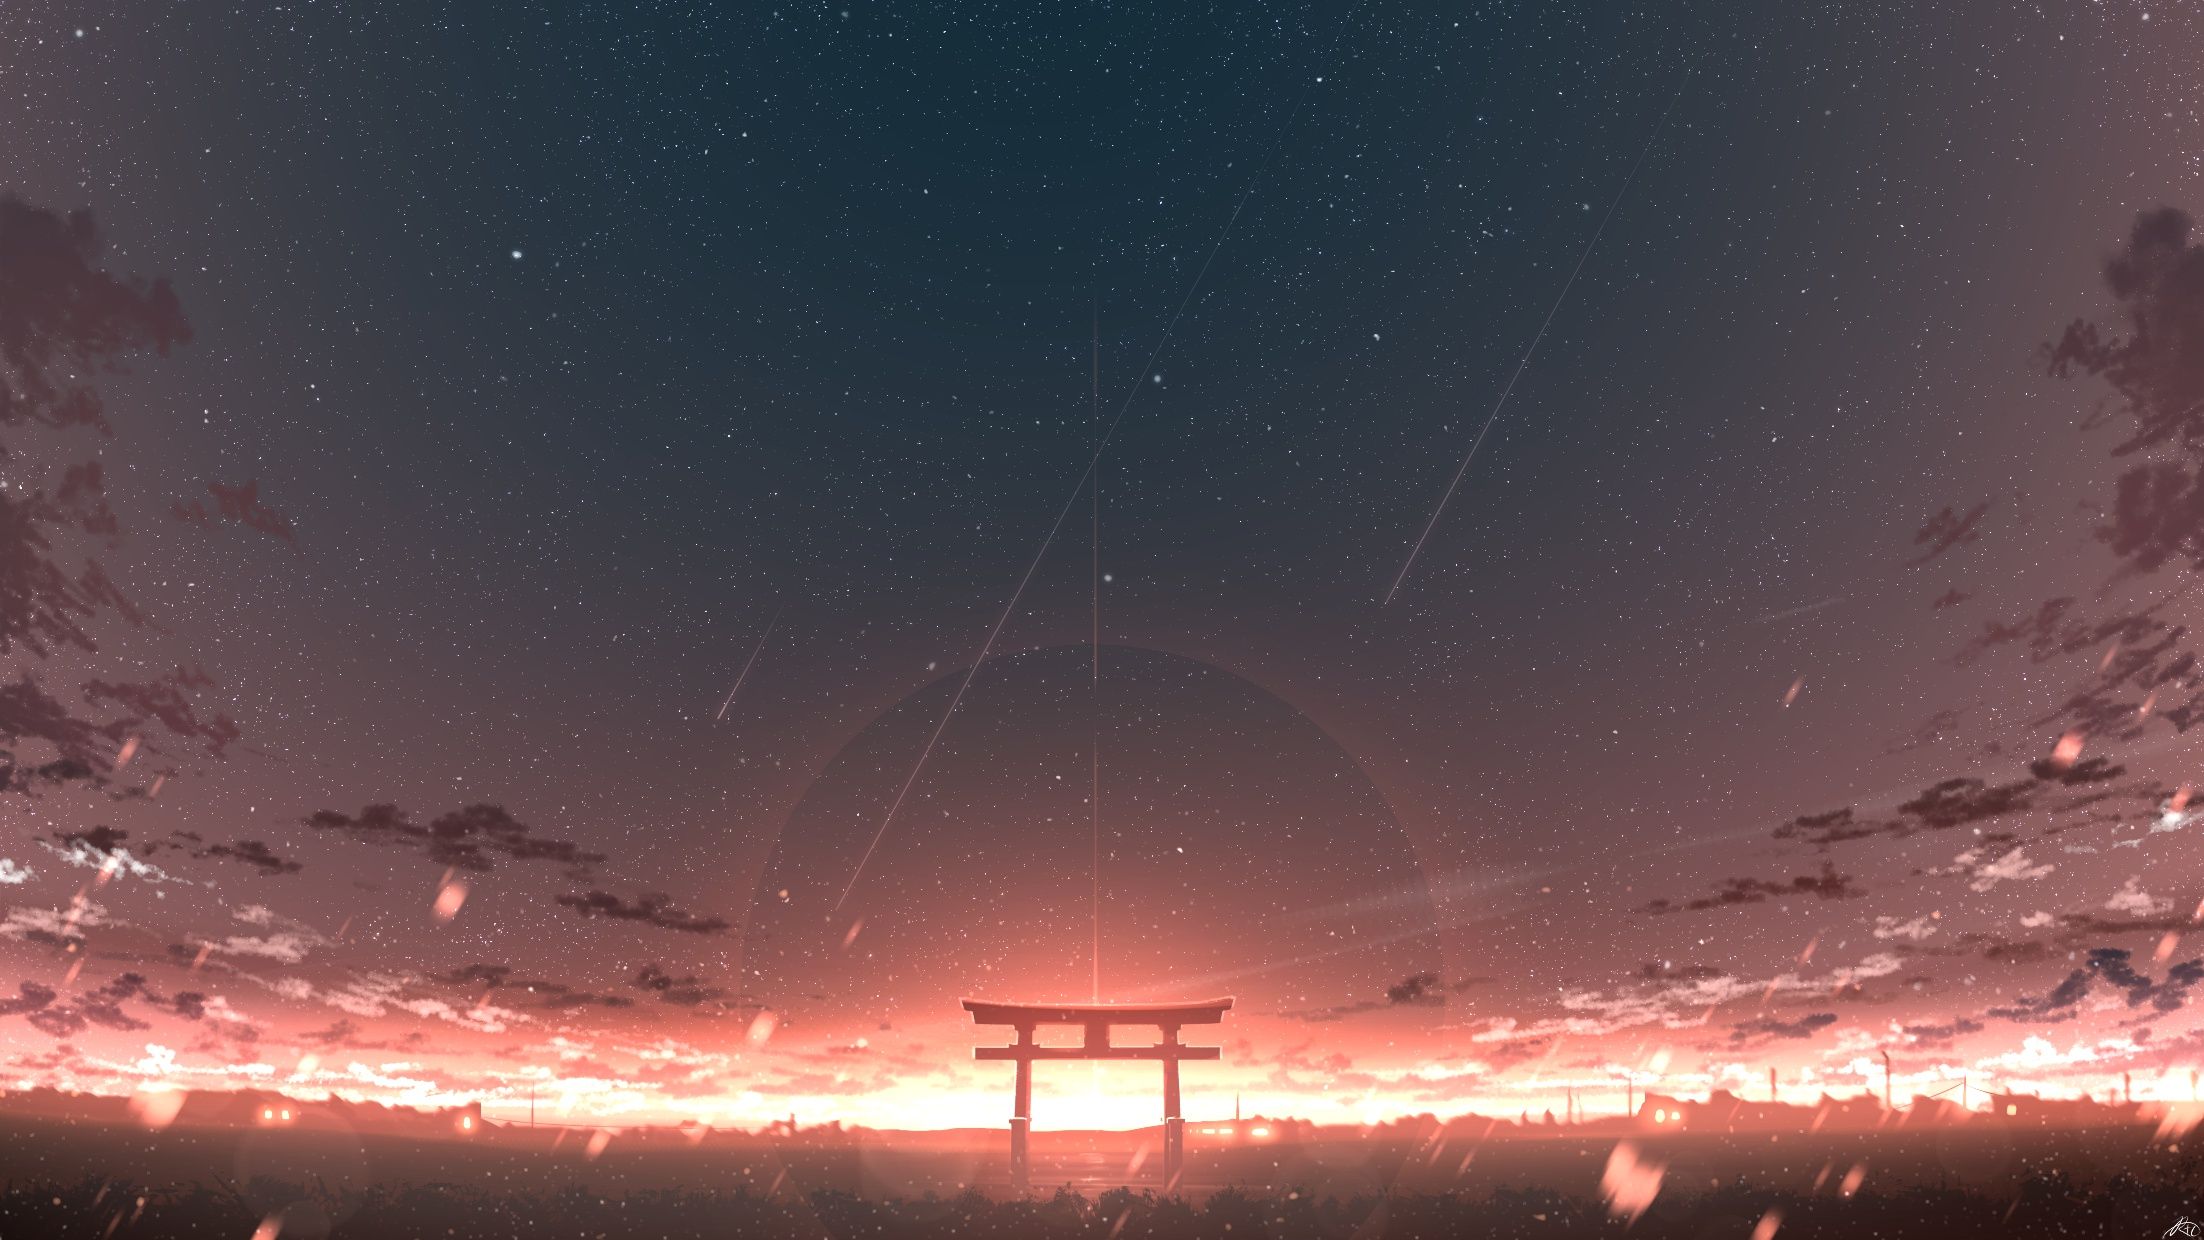 A torii gate stands in a field at sunset, with shooting stars in the sky - Sunrise